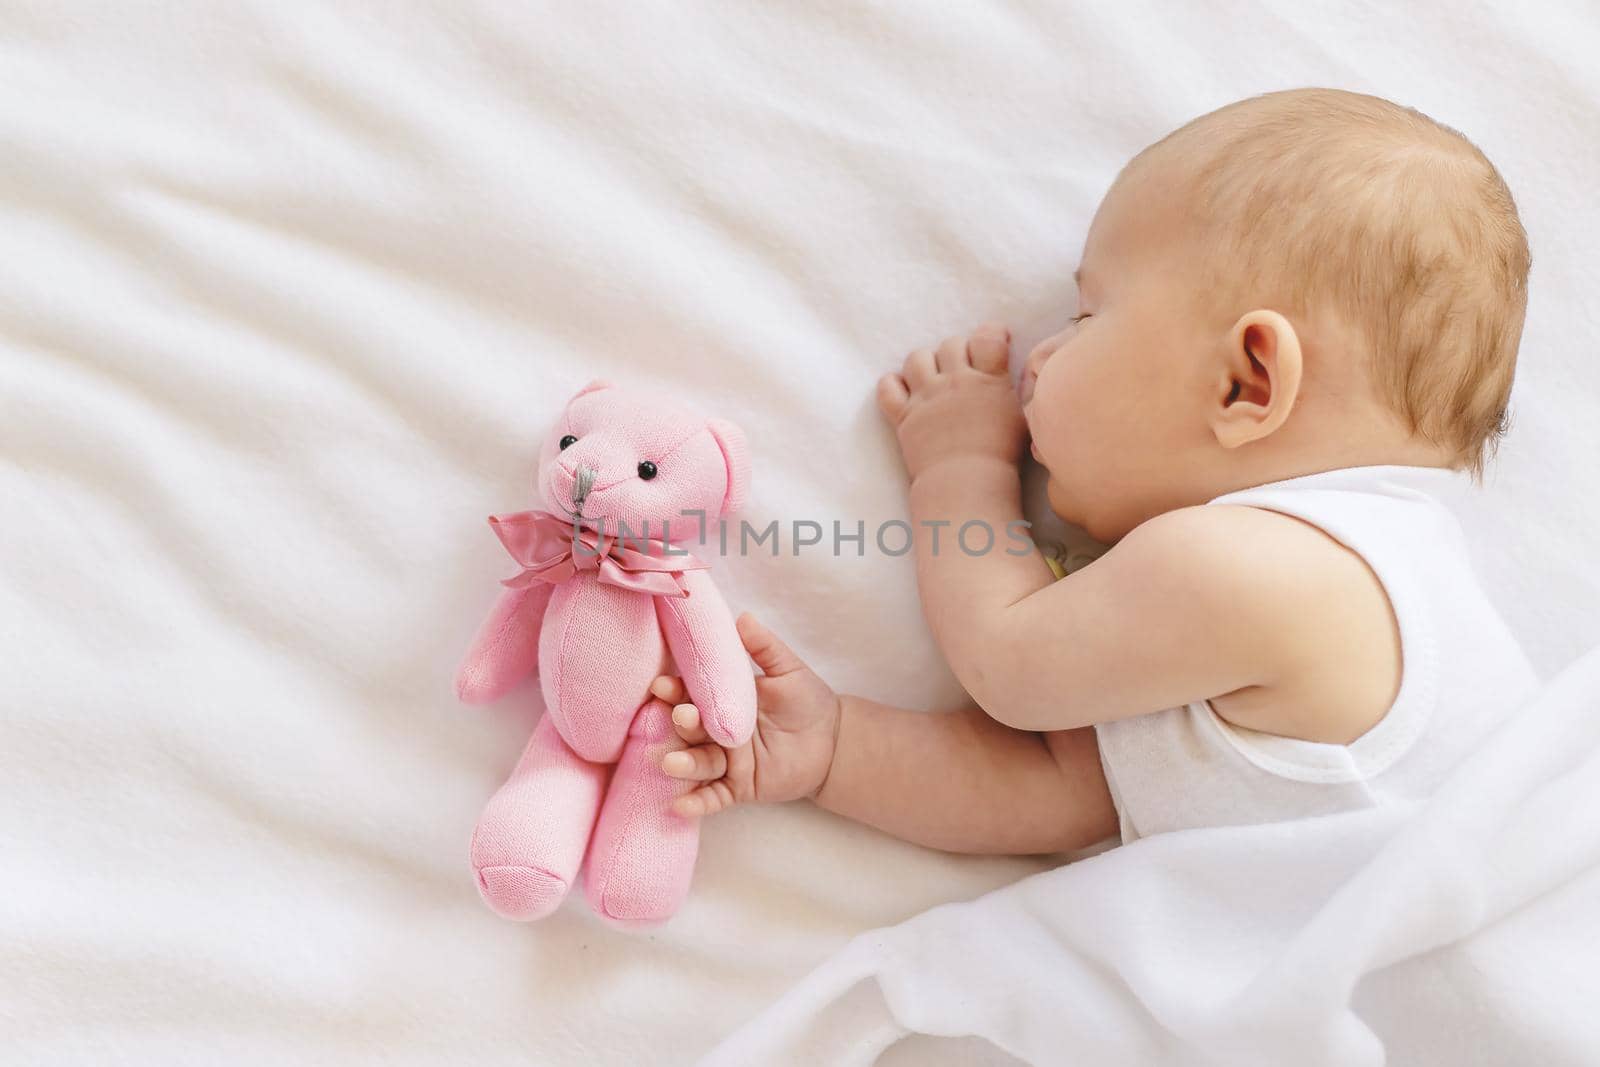 Baby sleeps with a teddy bear on a white background. Selective focus. People.